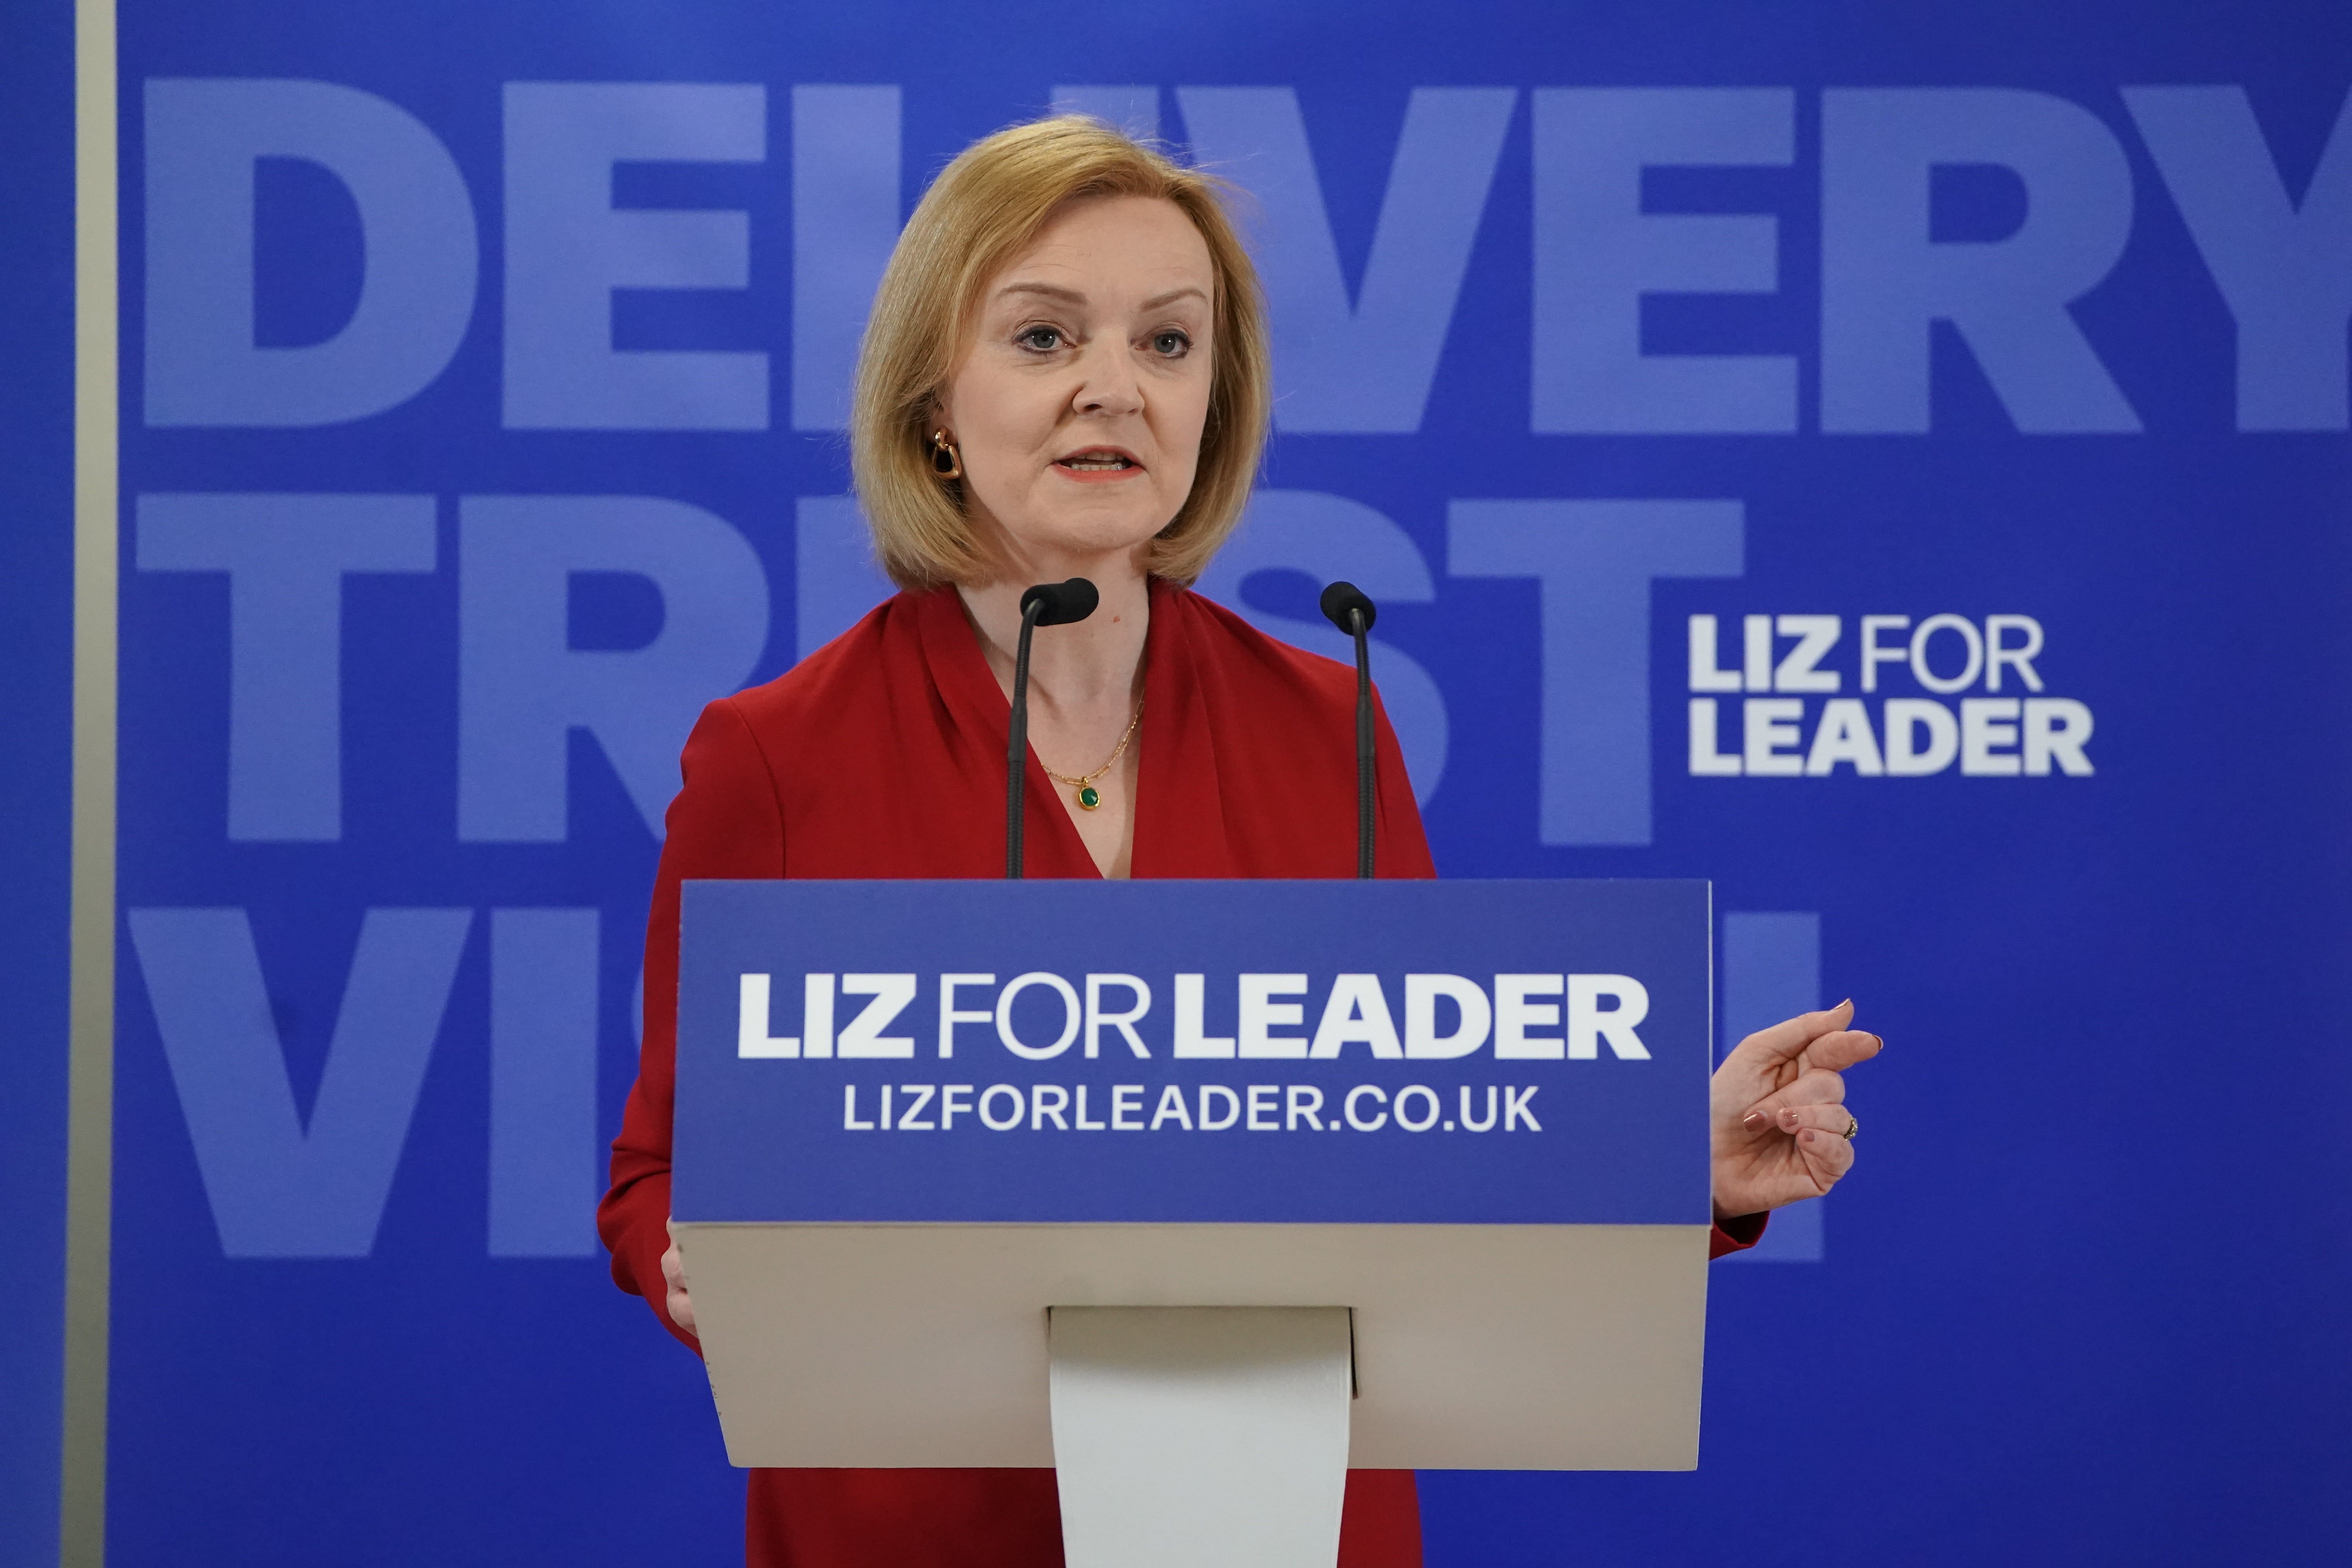 Liz Truss at the launch of her campaign to be Conservative Party leader and prime minister (PA)